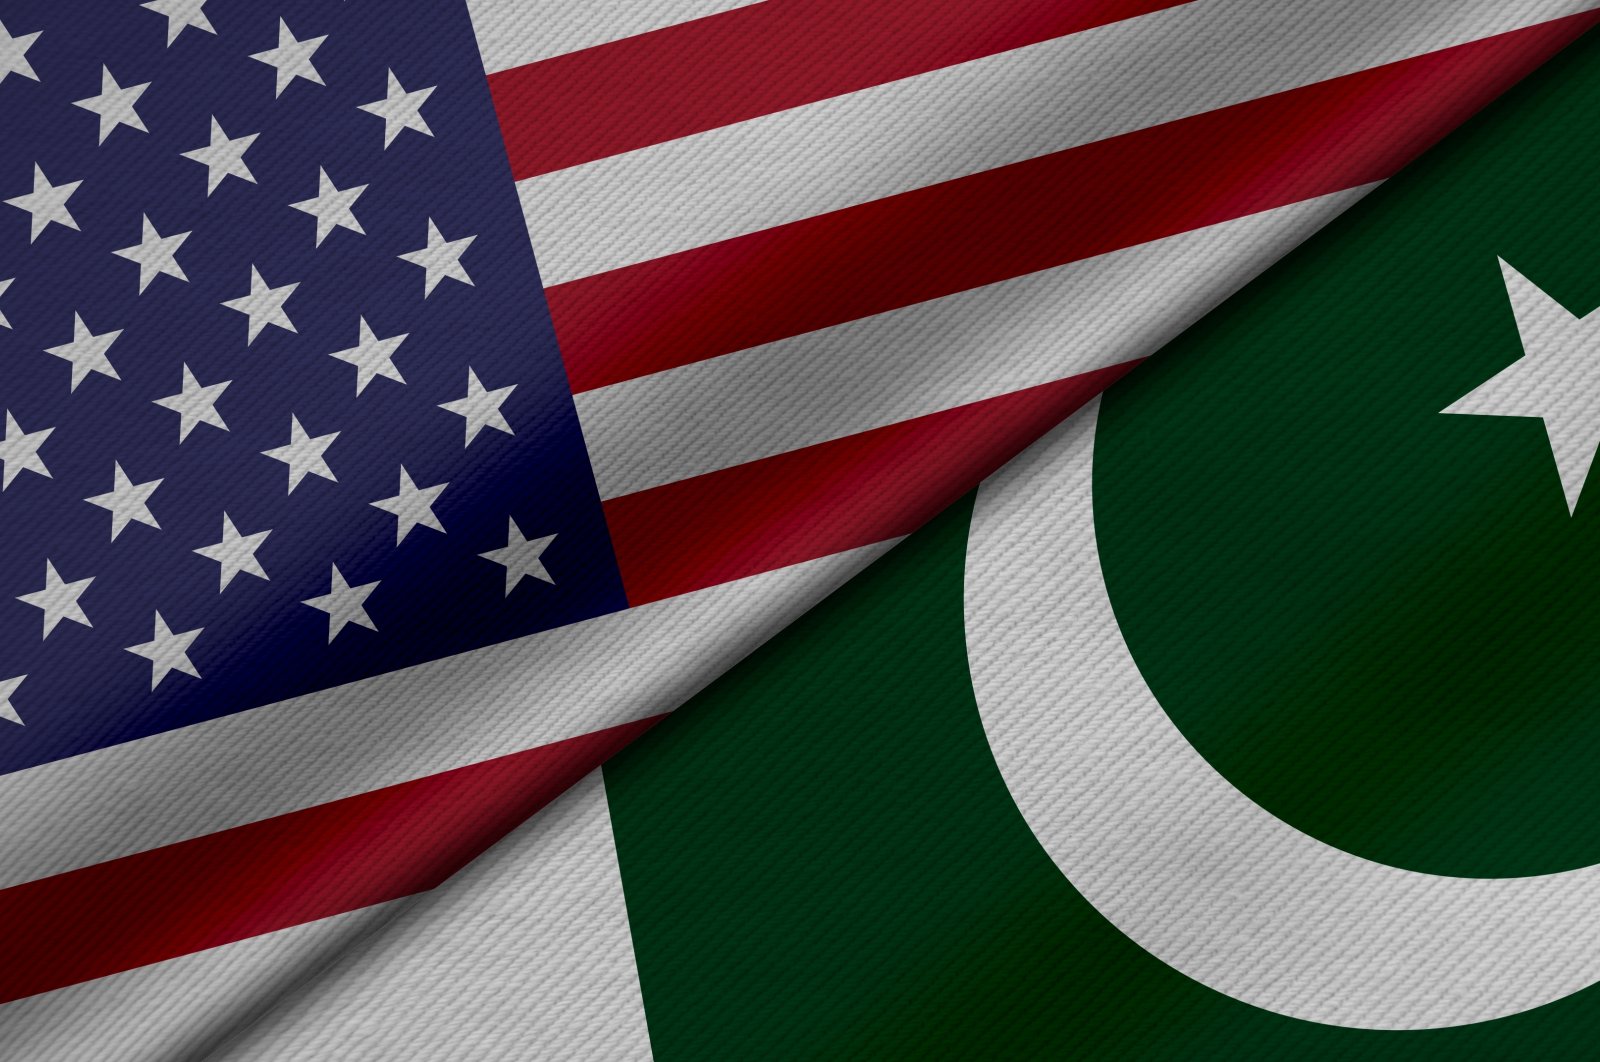 The flags of the United States and Pakistan. (Photo by Shutterstock)